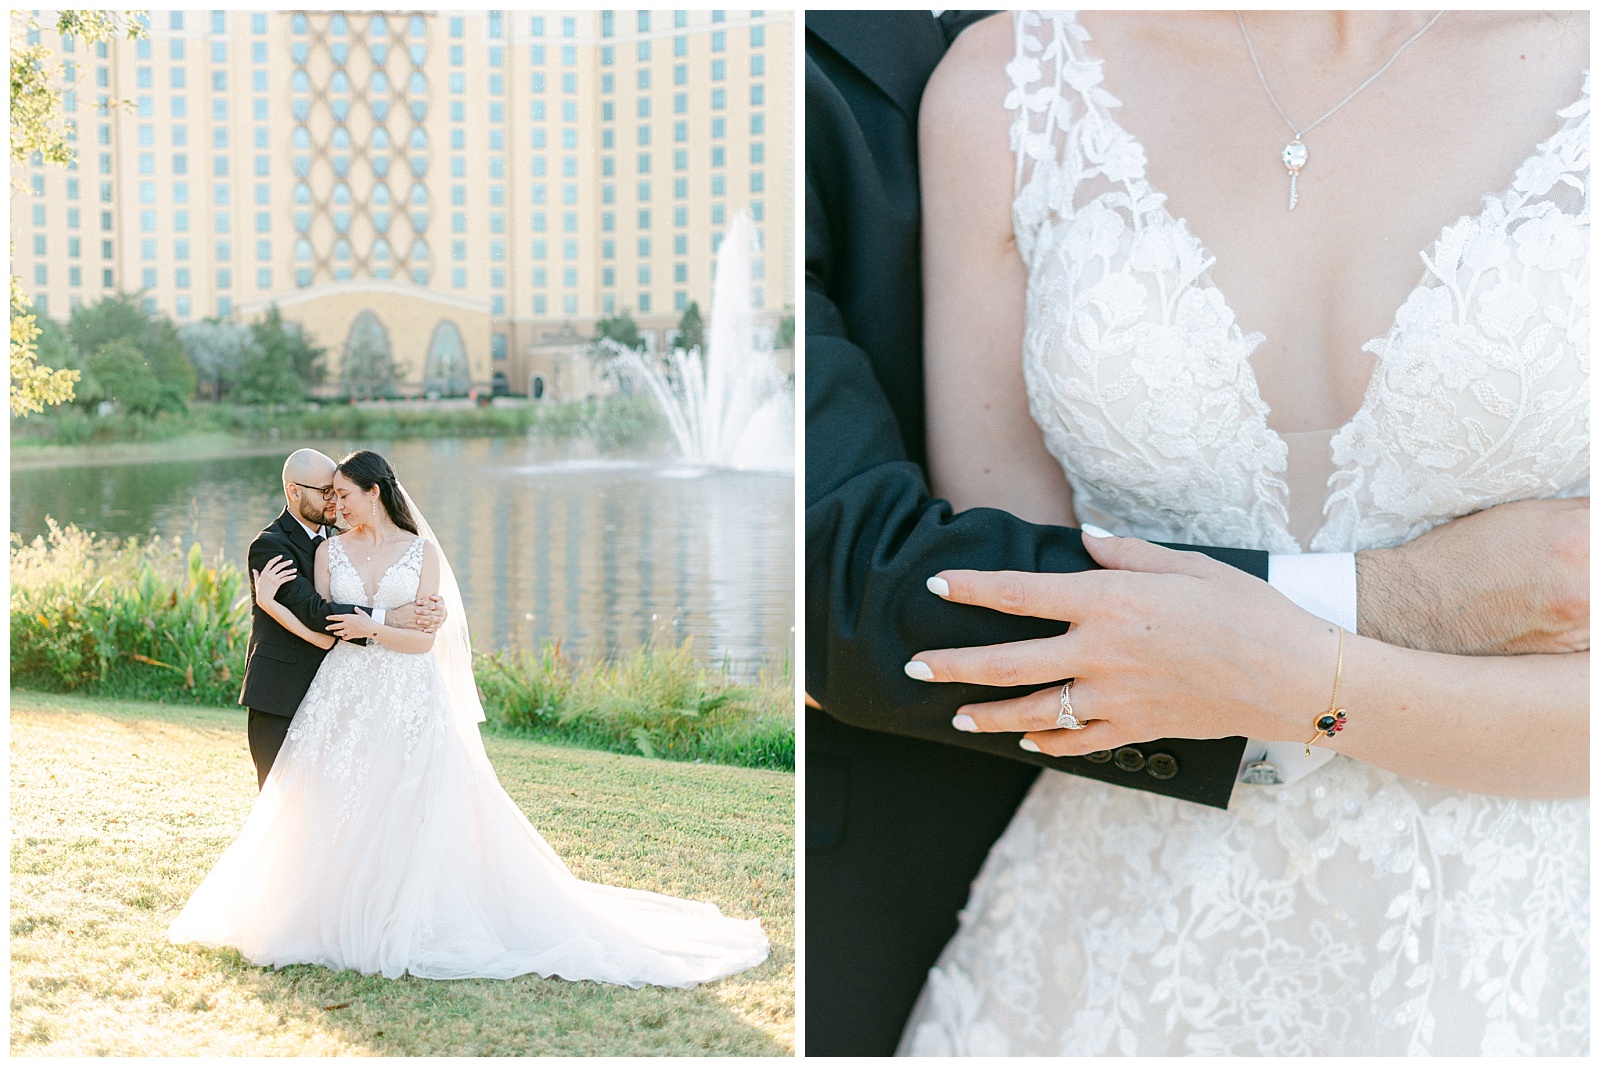 Left: Bride and Groom to in a quiet moment during morning couple portraits
Right: Detail photograph of embrace and jewelry
By Elizabeth Kane Photography in Orlando Florida